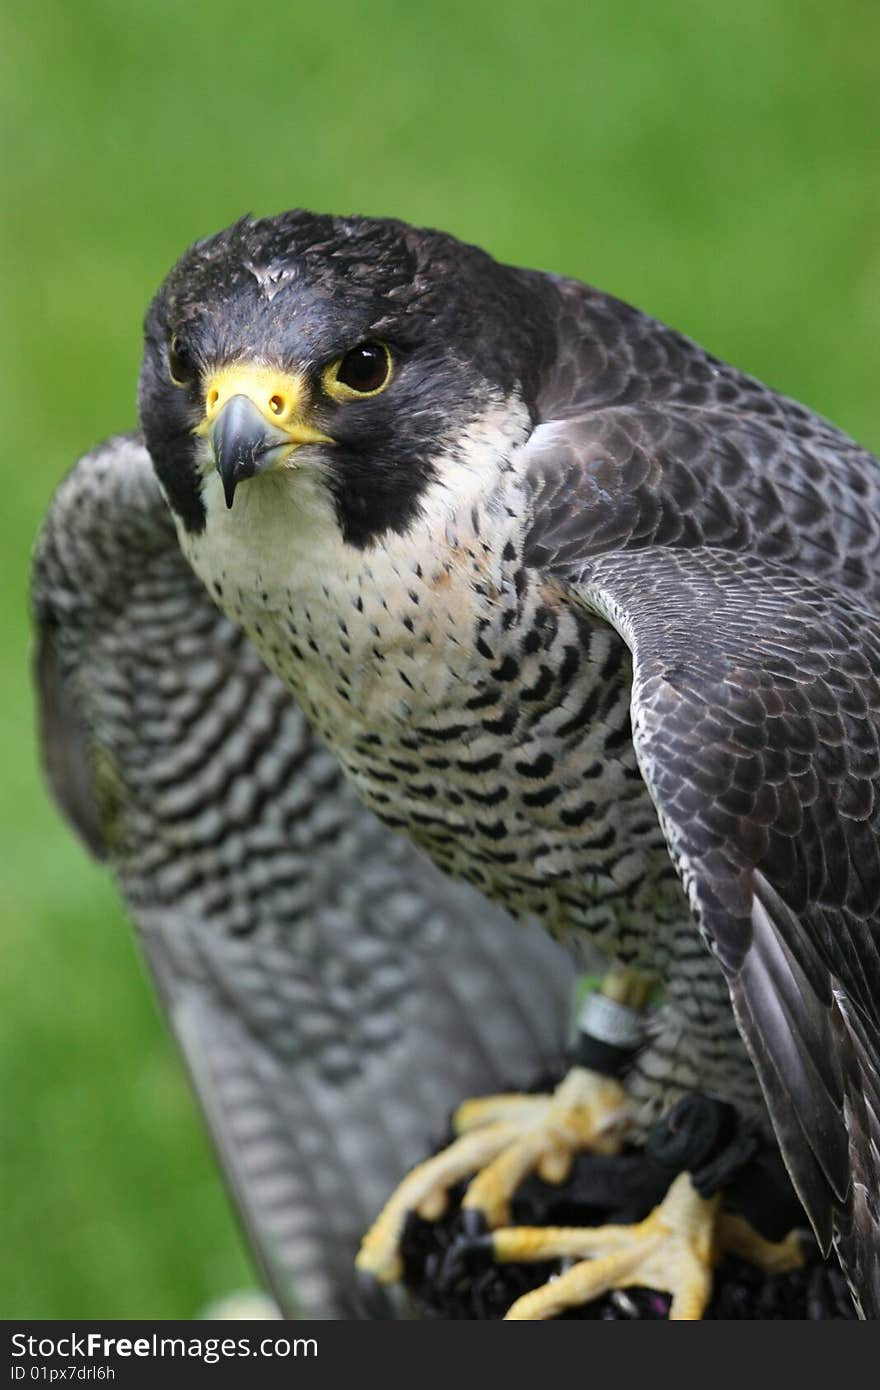 The Peregrine Falcon (Falco peregrinus), also known simply as the Peregrine,and historically as the Duck Hawk in North America, is a cosmopolitan bird of prey in the family Falconidae. It is a large, crow-sized falcon, with a blue-gray back, barred white underparts, and a black head and moustache. It can reach speeds over 320 km/h (200 mph) in a stoop, making it the fastest animal in the world. The Peregrine Falcon (Falco peregrinus), also known simply as the Peregrine,and historically as the Duck Hawk in North America, is a cosmopolitan bird of prey in the family Falconidae. It is a large, crow-sized falcon, with a blue-gray back, barred white underparts, and a black head and moustache. It can reach speeds over 320 km/h (200 mph) in a stoop, making it the fastest animal in the world.